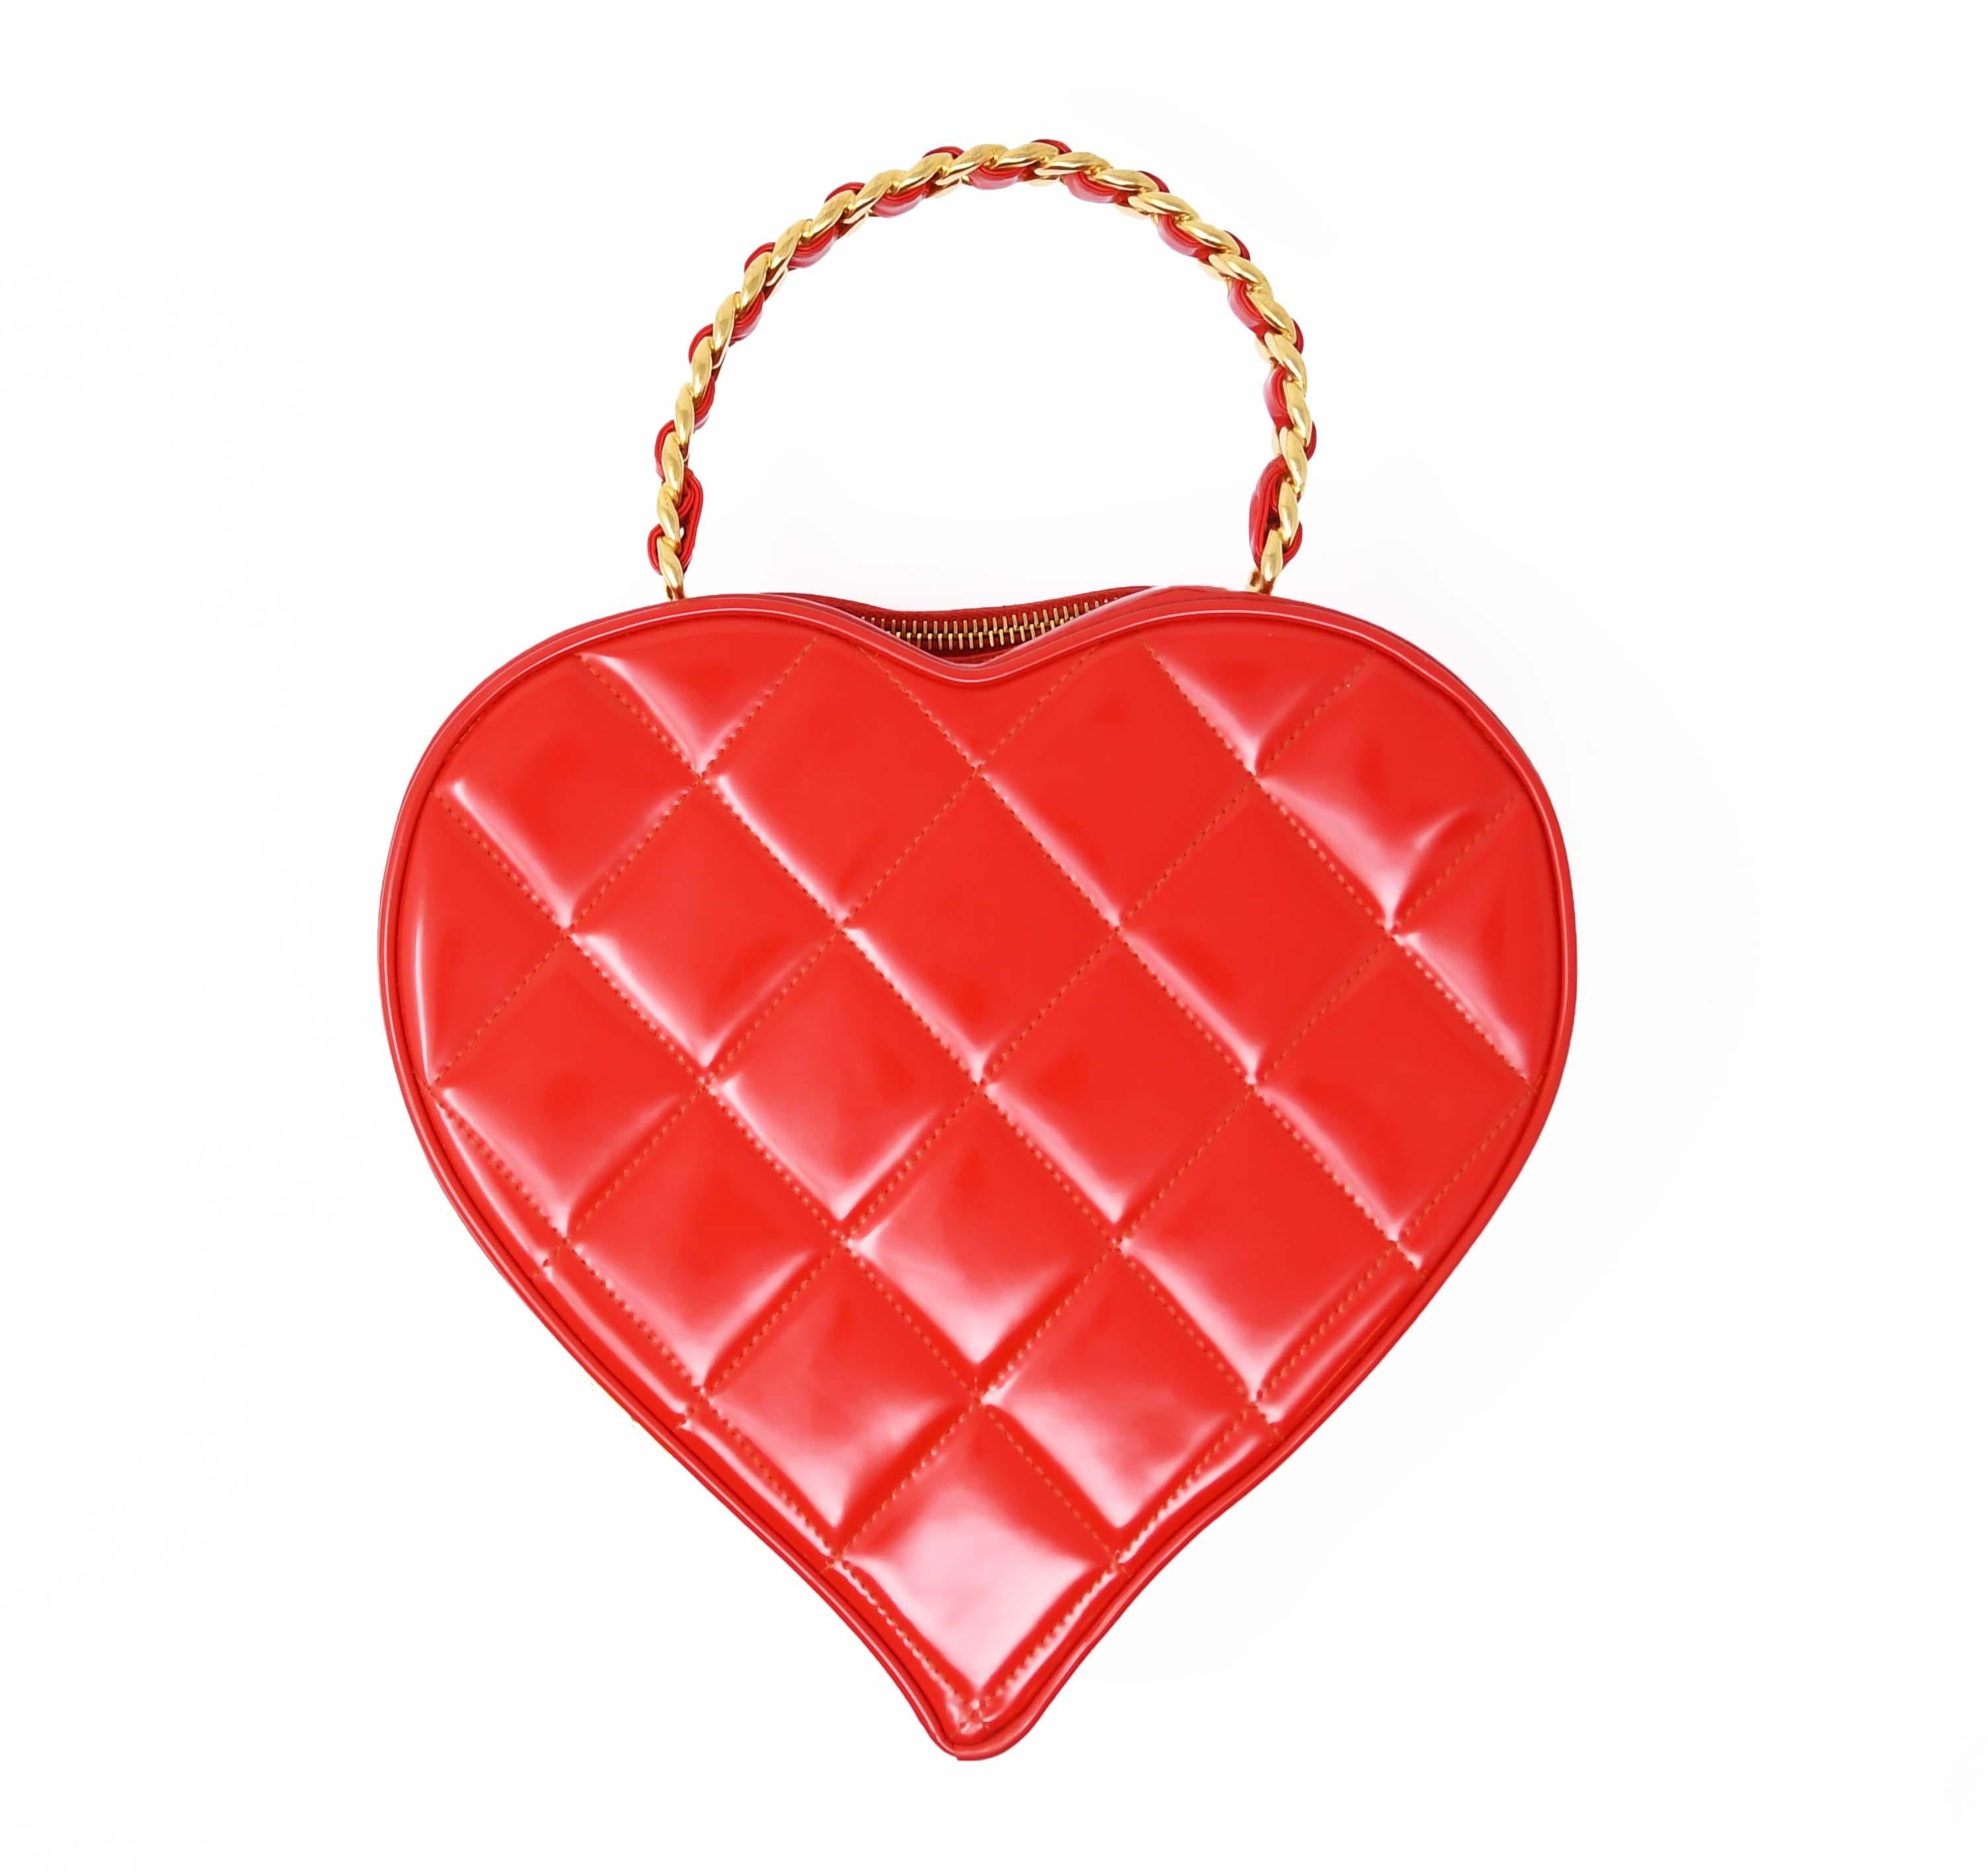 This Vintage Chanel quilted heart shaped bag is a limited edition piece from the early '90s.  Made of bright red patent leather with a black CC logo and gold chain handle.  A true collector's piece.

Condition: In excellent vintage